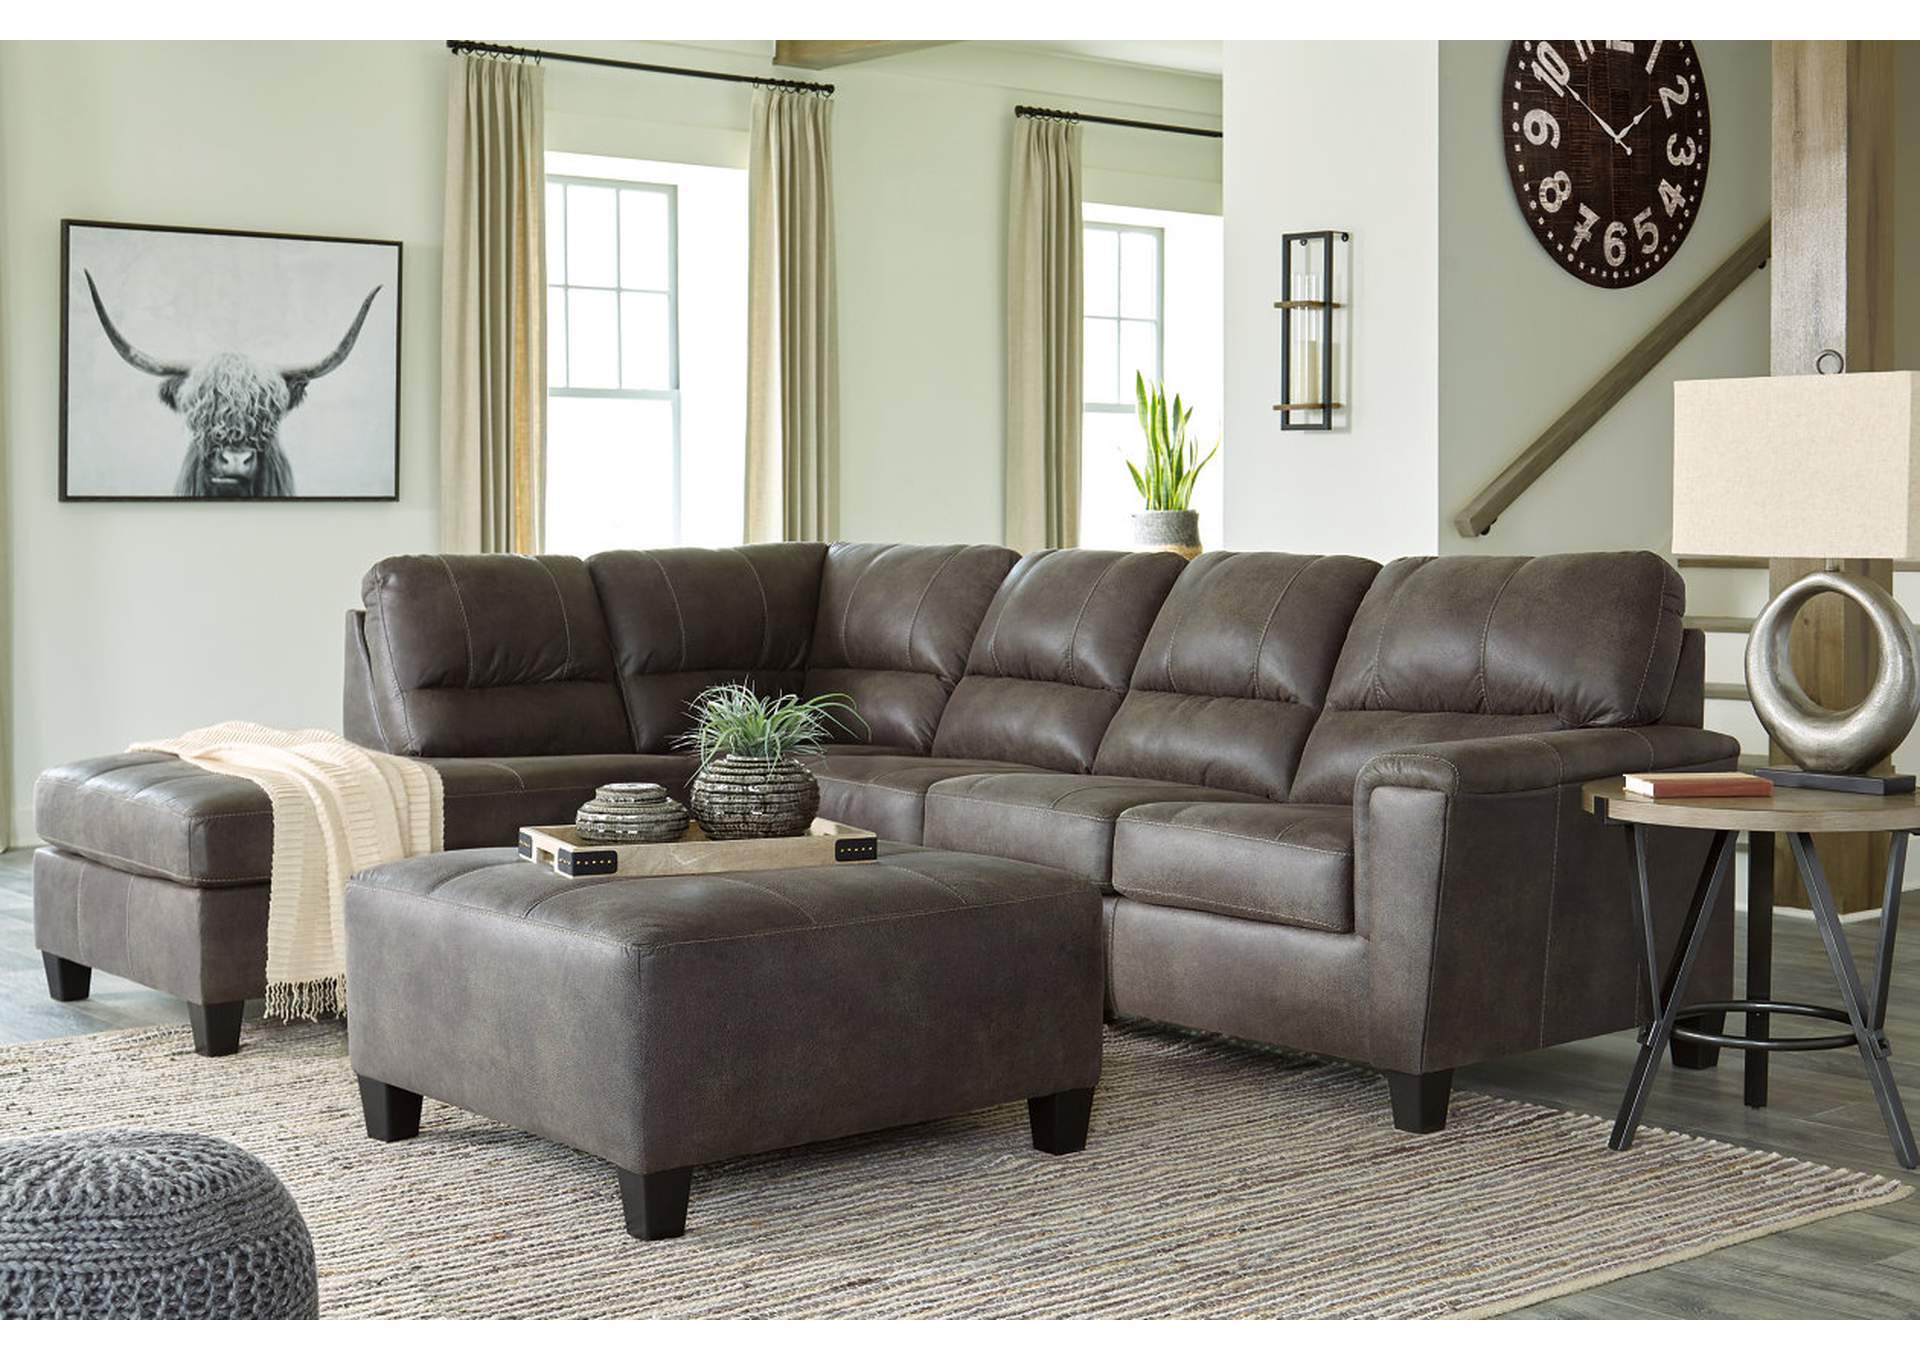 Navi 2-Piece Sectional with Ottoman,Signature Design By Ashley